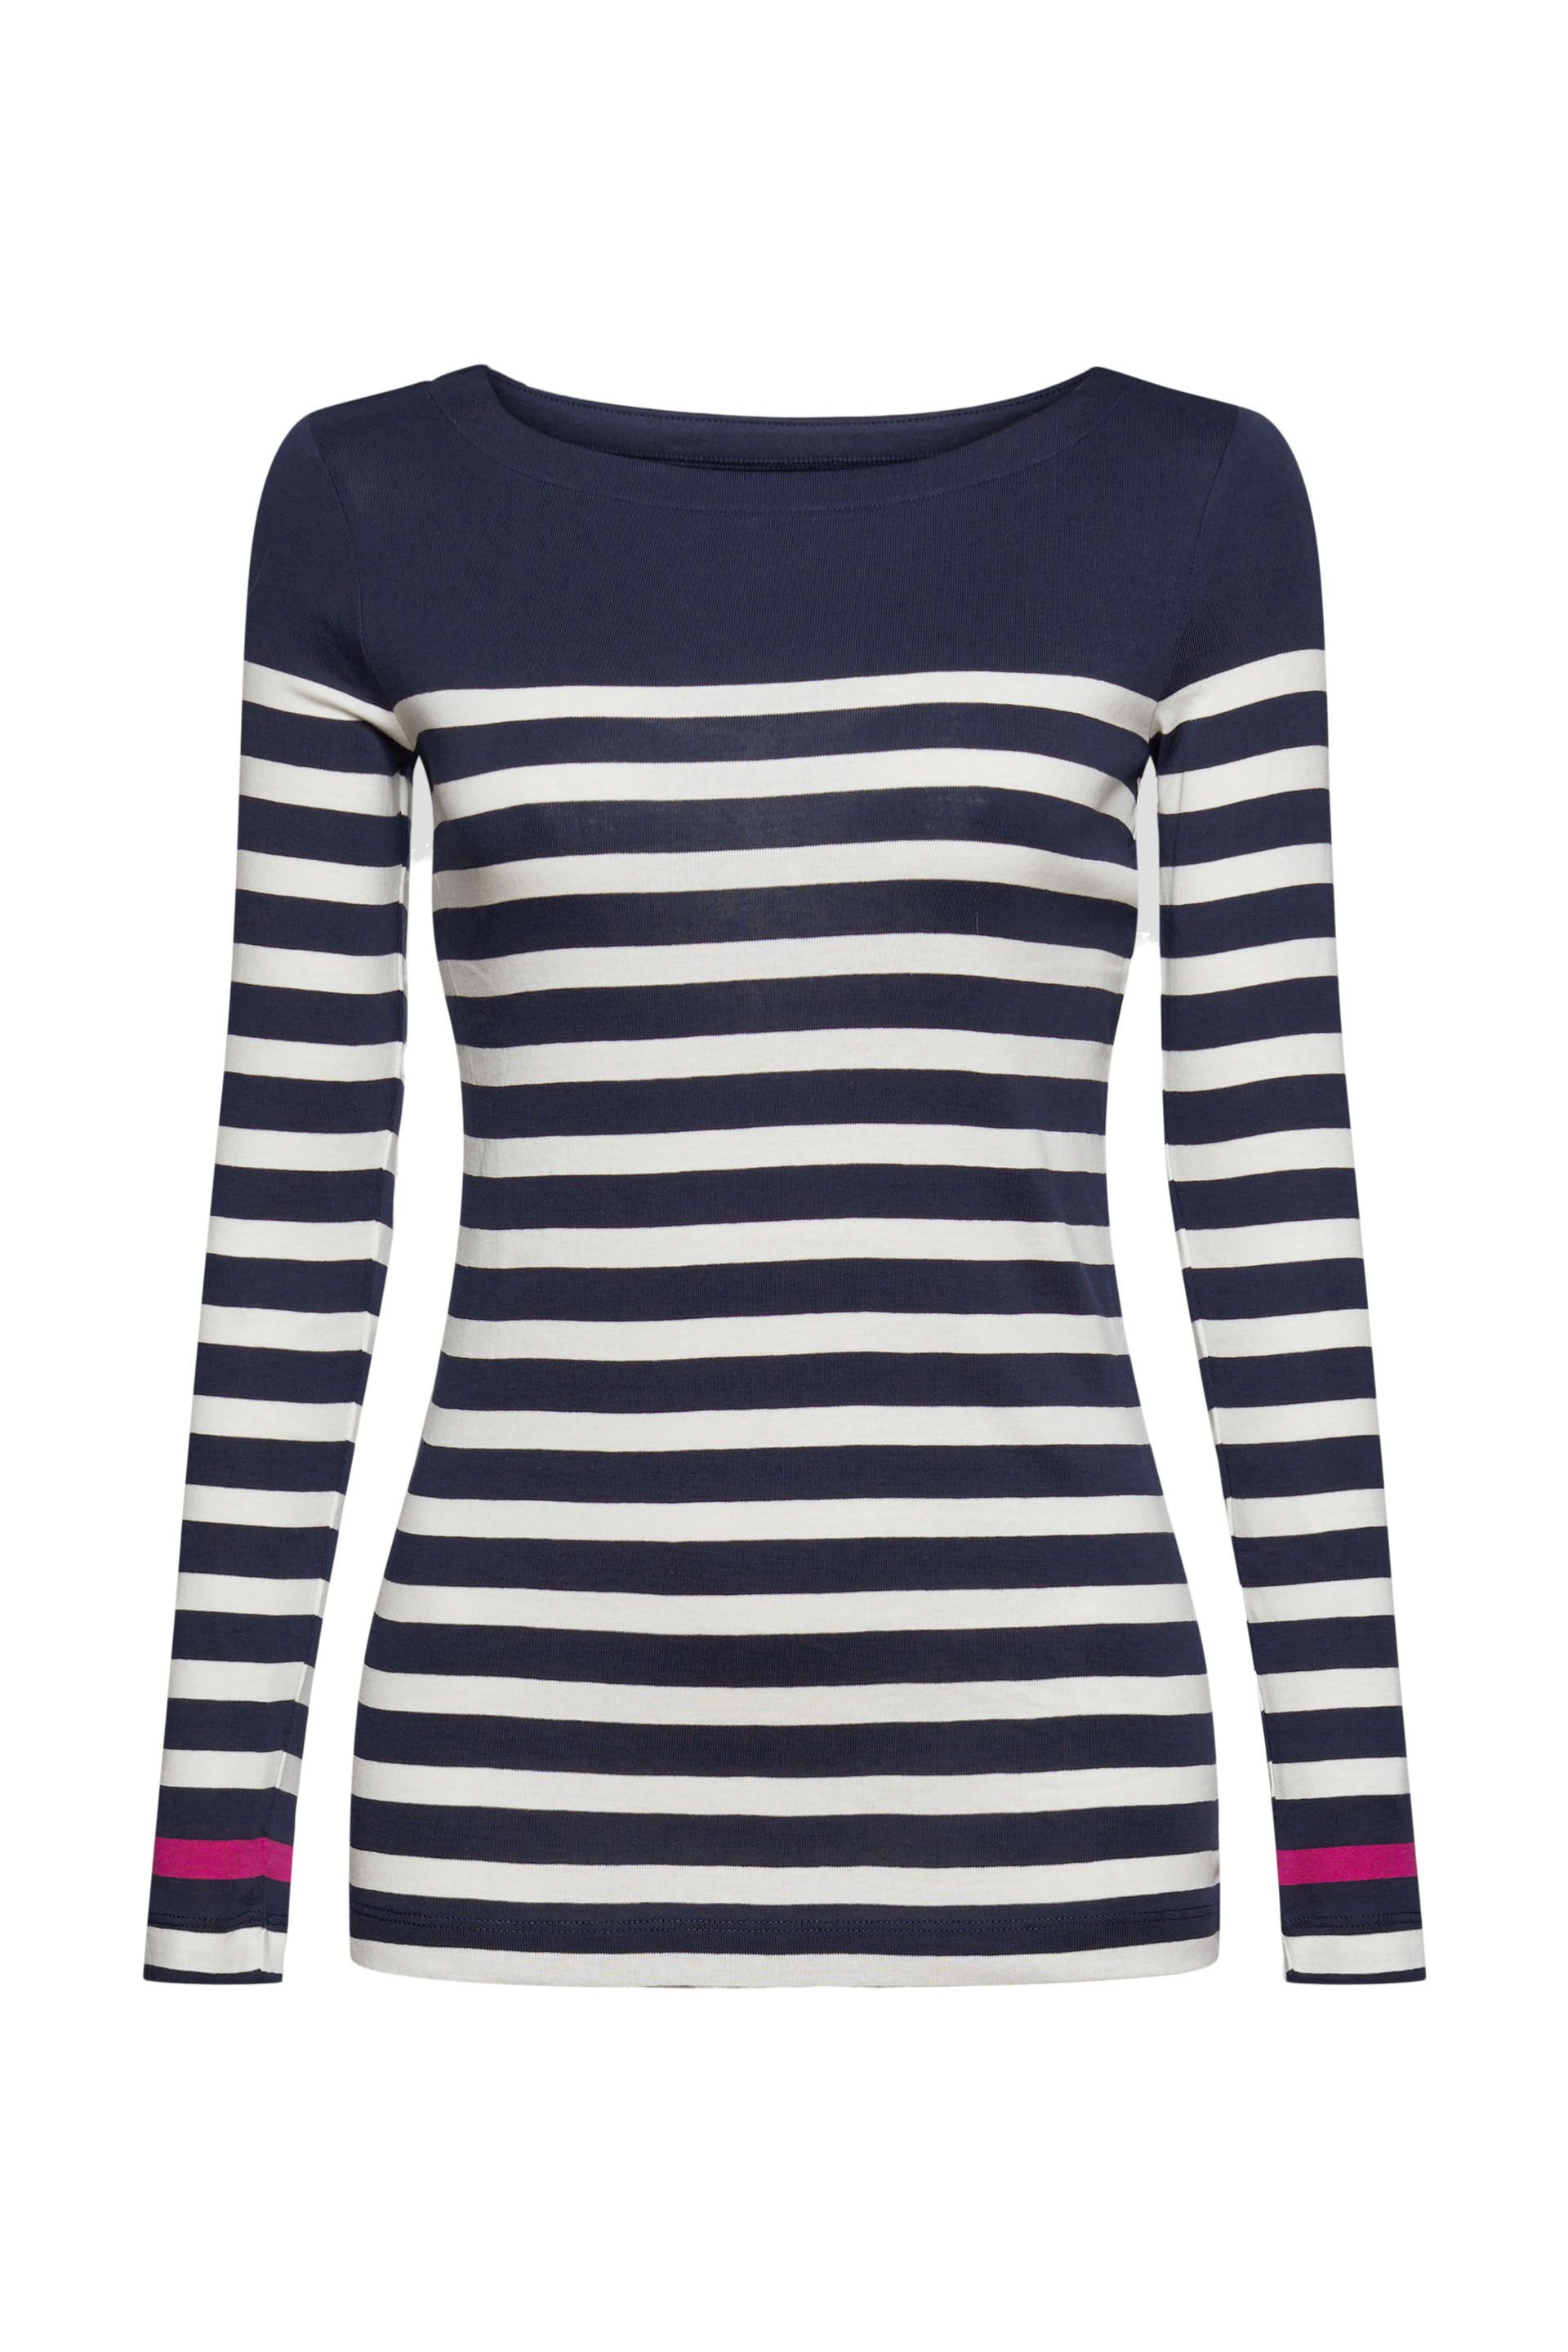 Long-sleeved shirt with marinare striped pattern, Blue, large image number 0